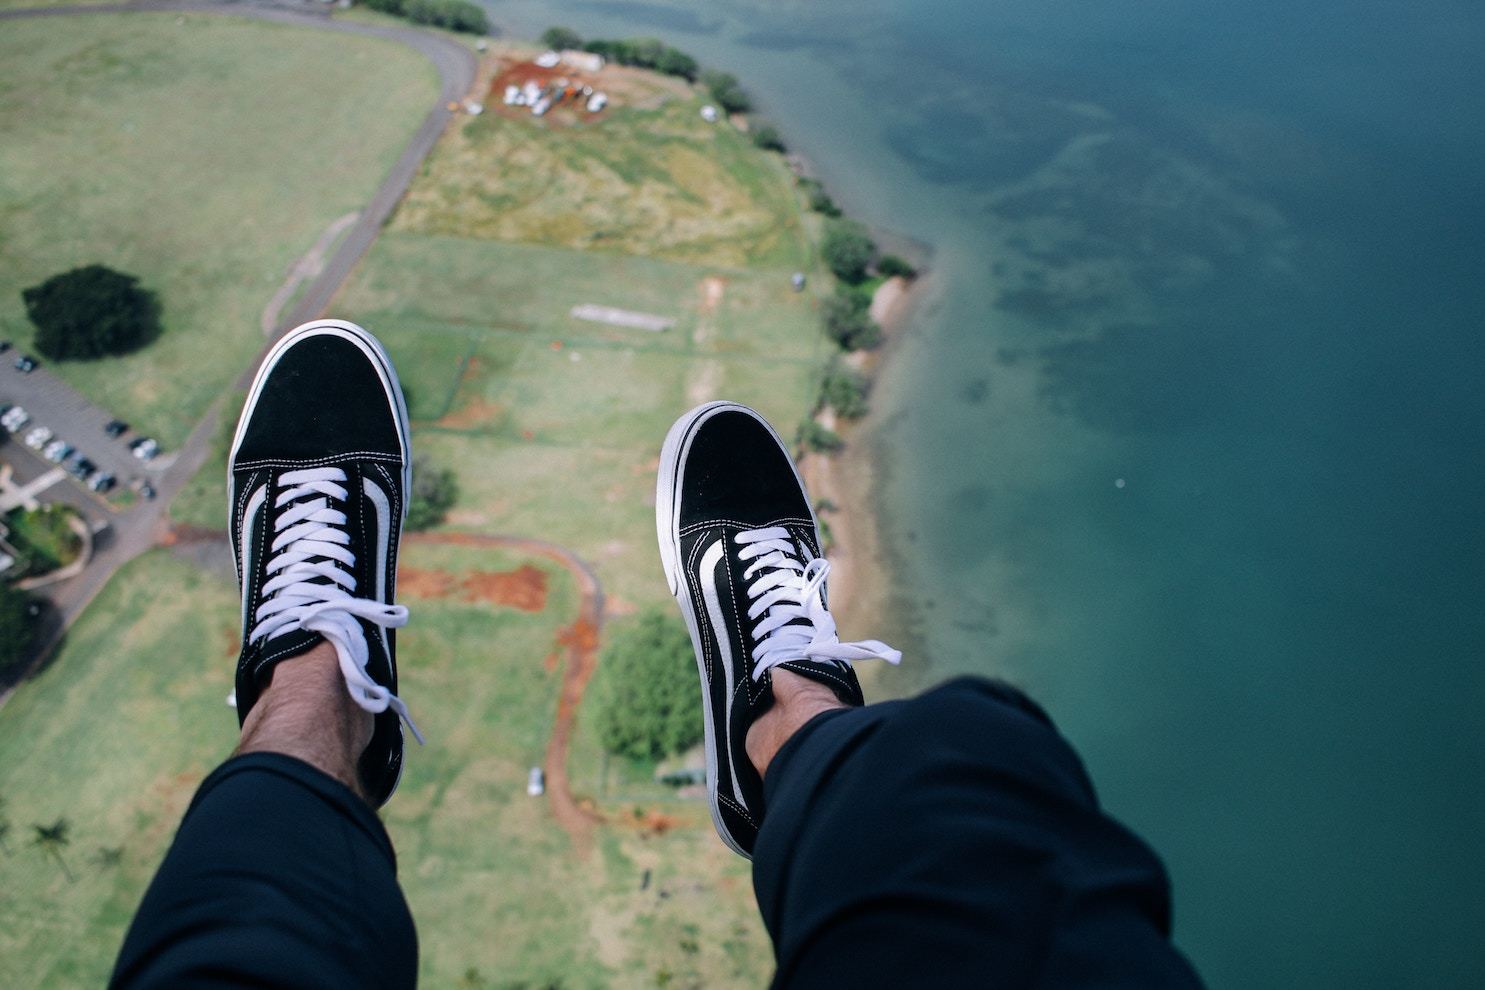 A man's legs, in baggy pants and sneakers, hang above the shoreline as seen from above